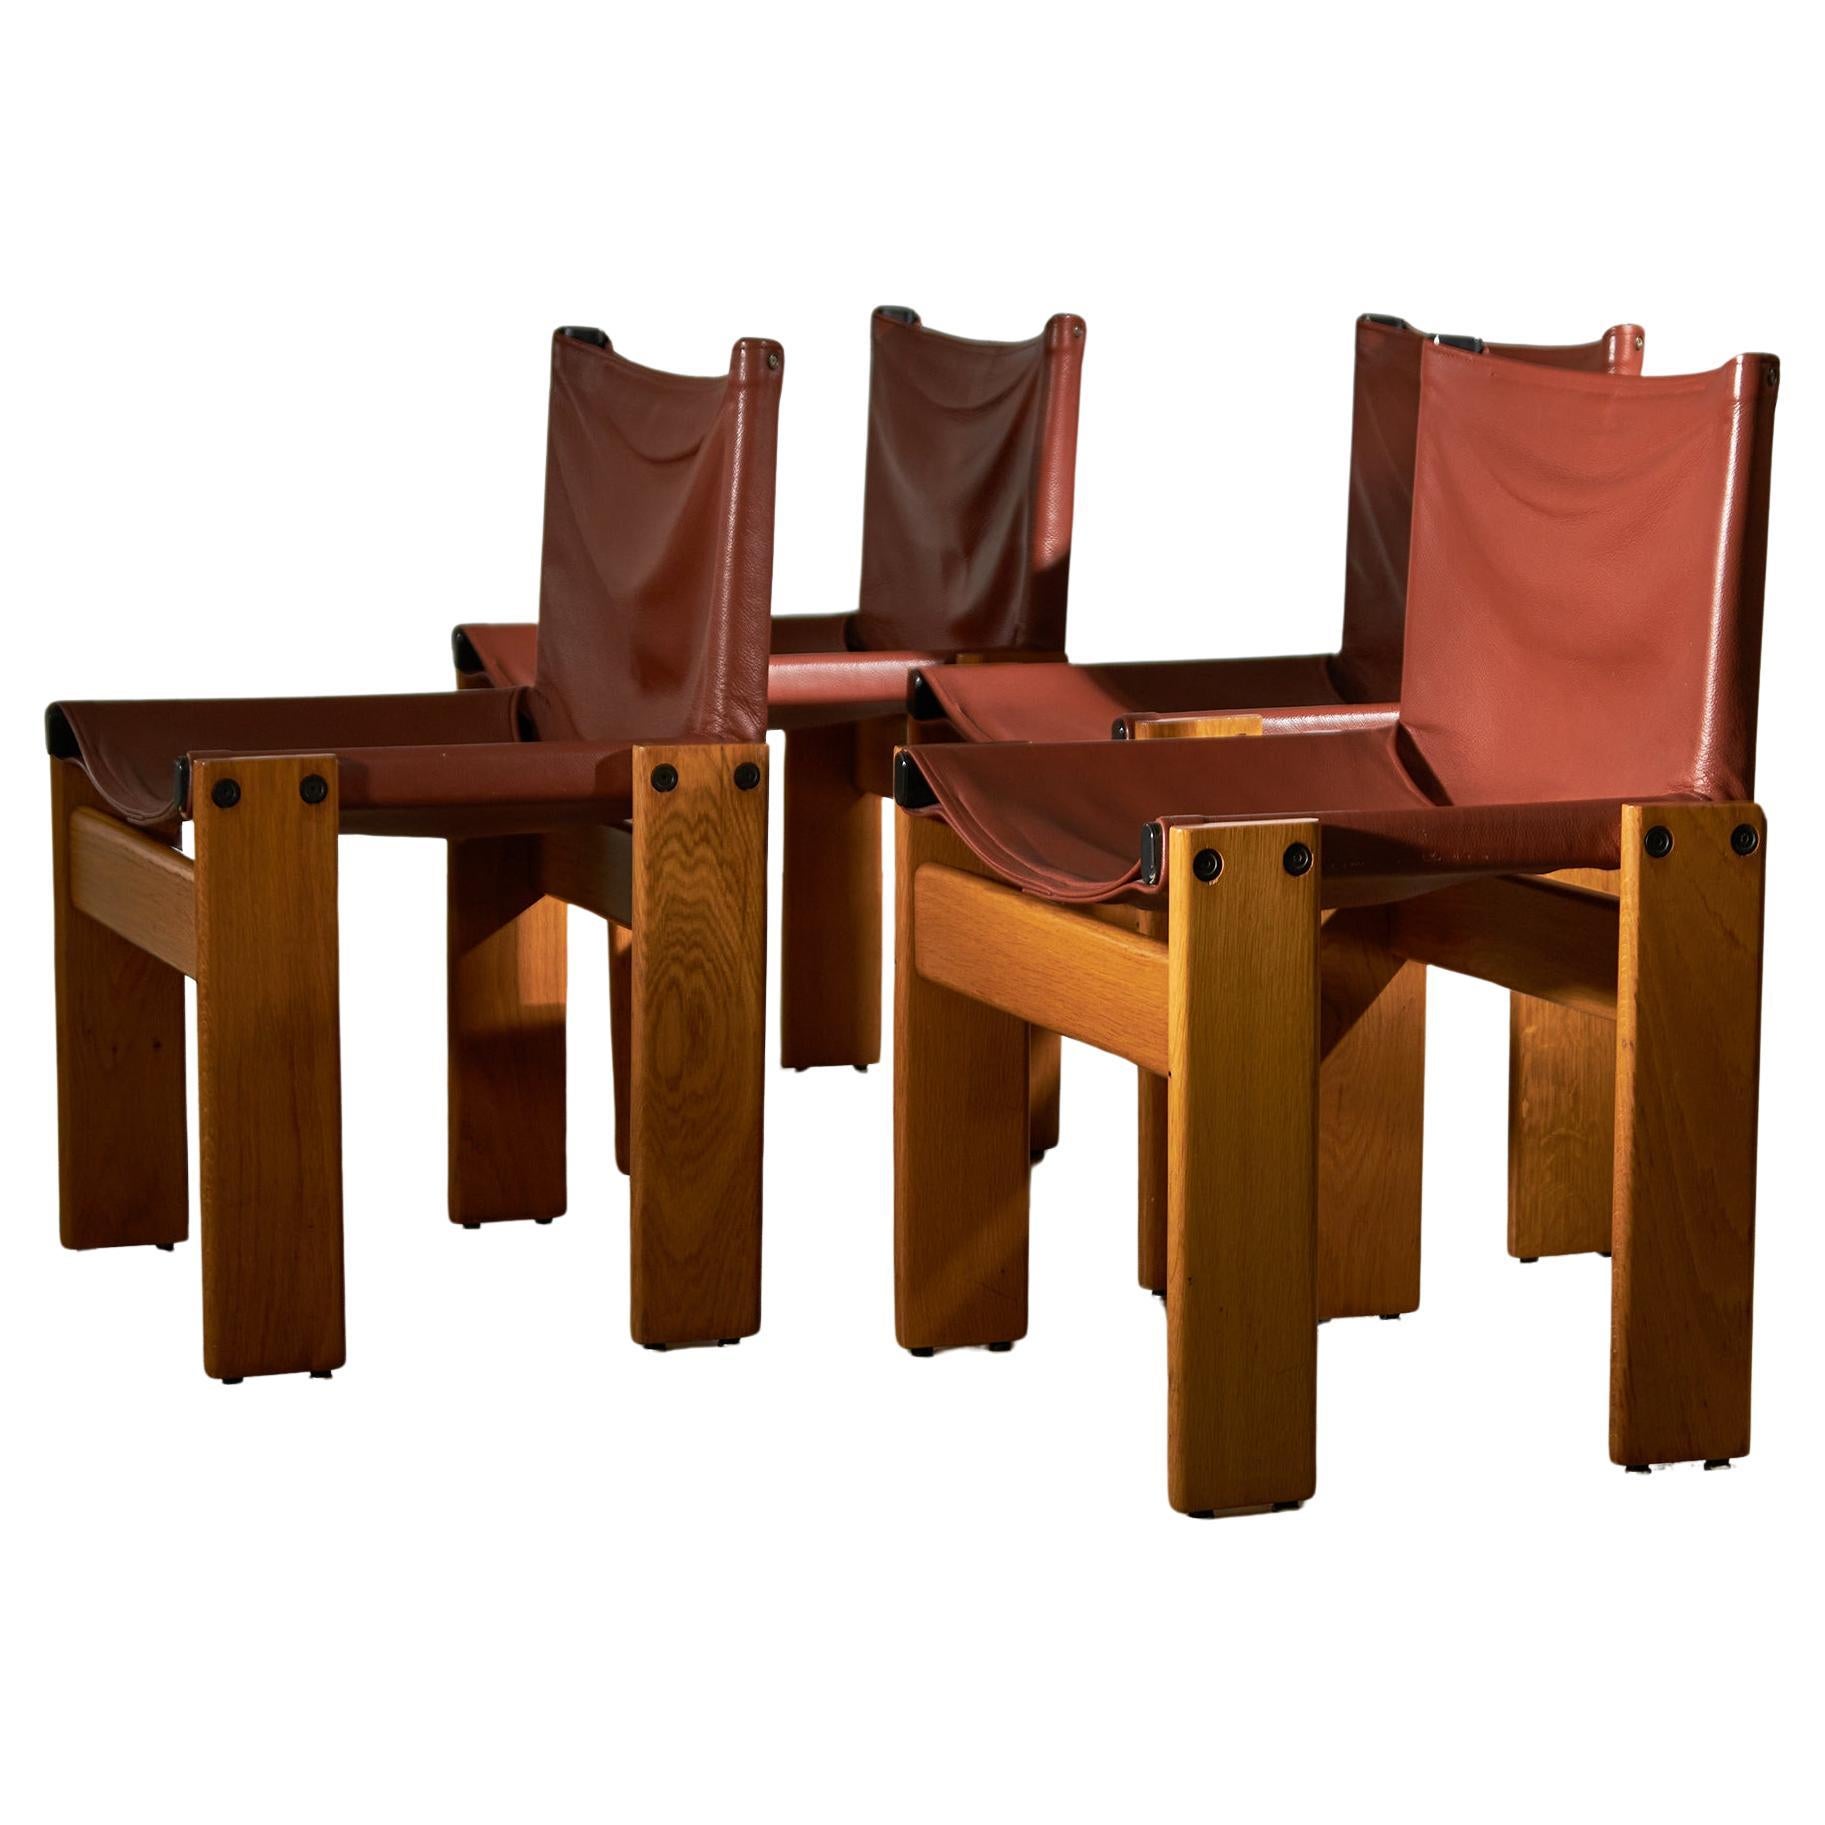 Set of Monk Chairs by Afra and Tobia Scarpa for Molteni, 1973 For Sale